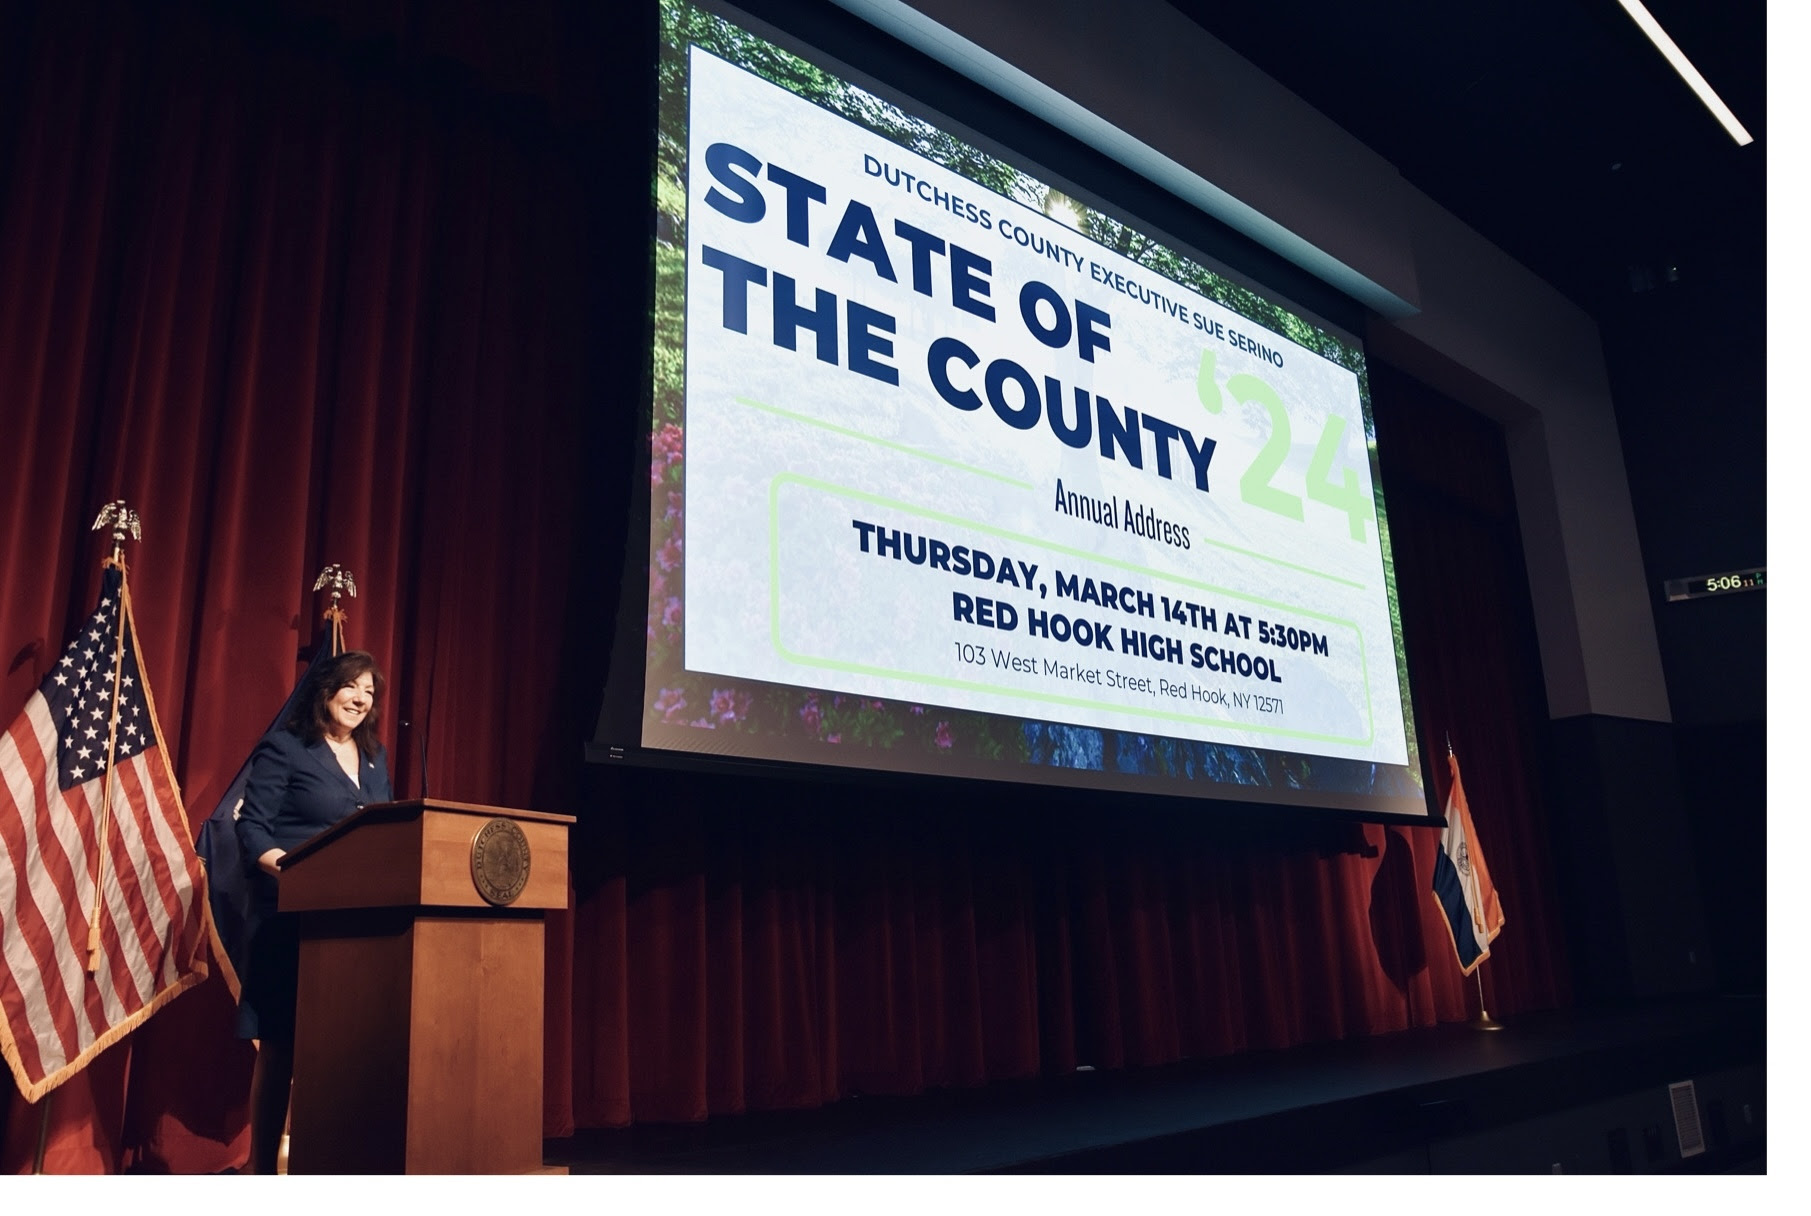 Dutchess County Executive Sue Serino presented her 2024 State of the County Address at Red Hook High School.